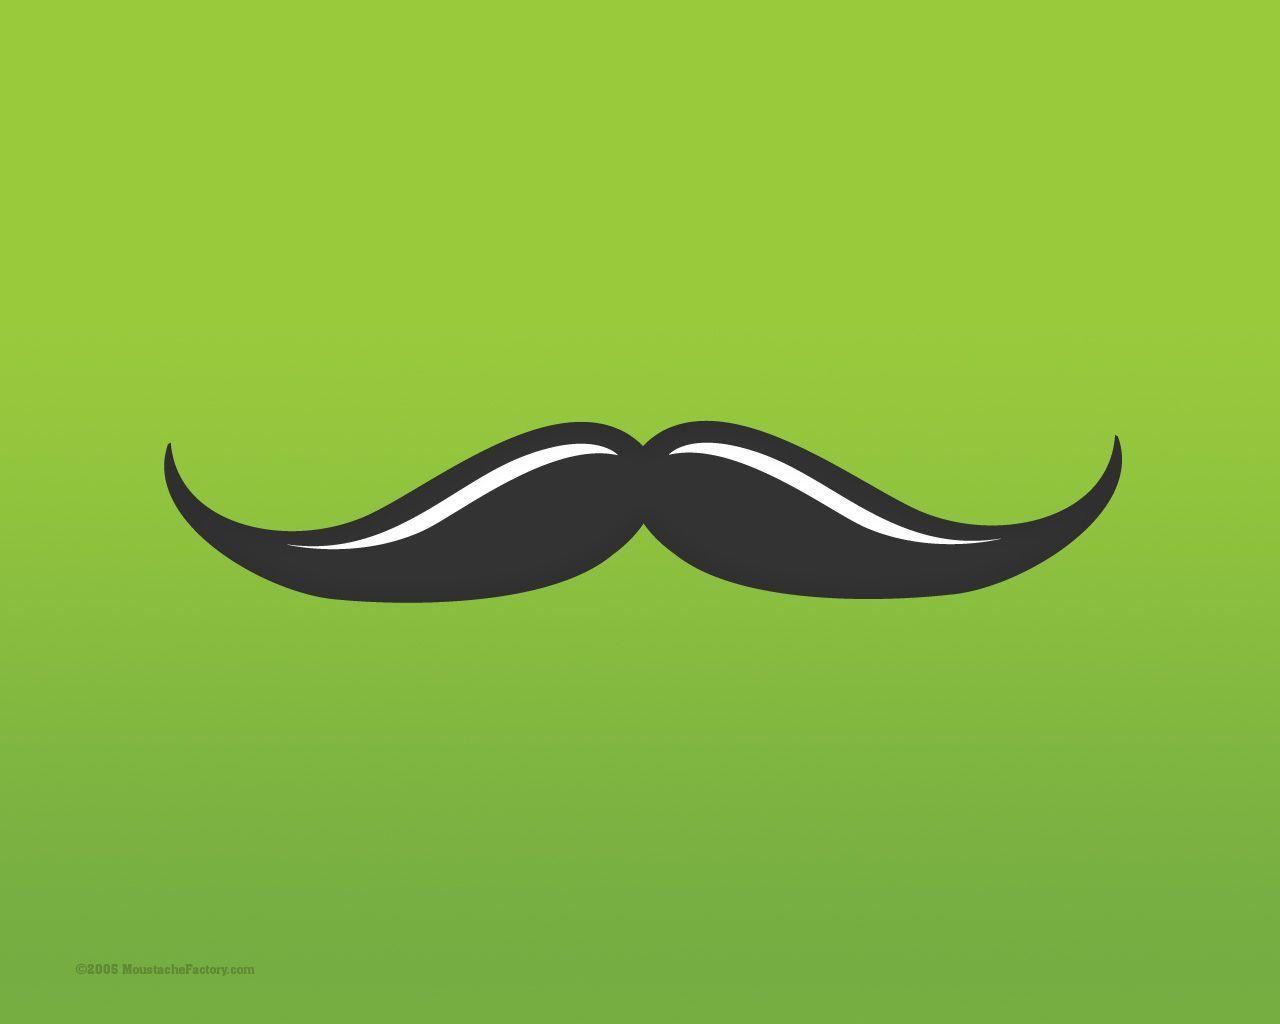 Moustache 1280 Wallpaper 1280×1024 and Background Image Free